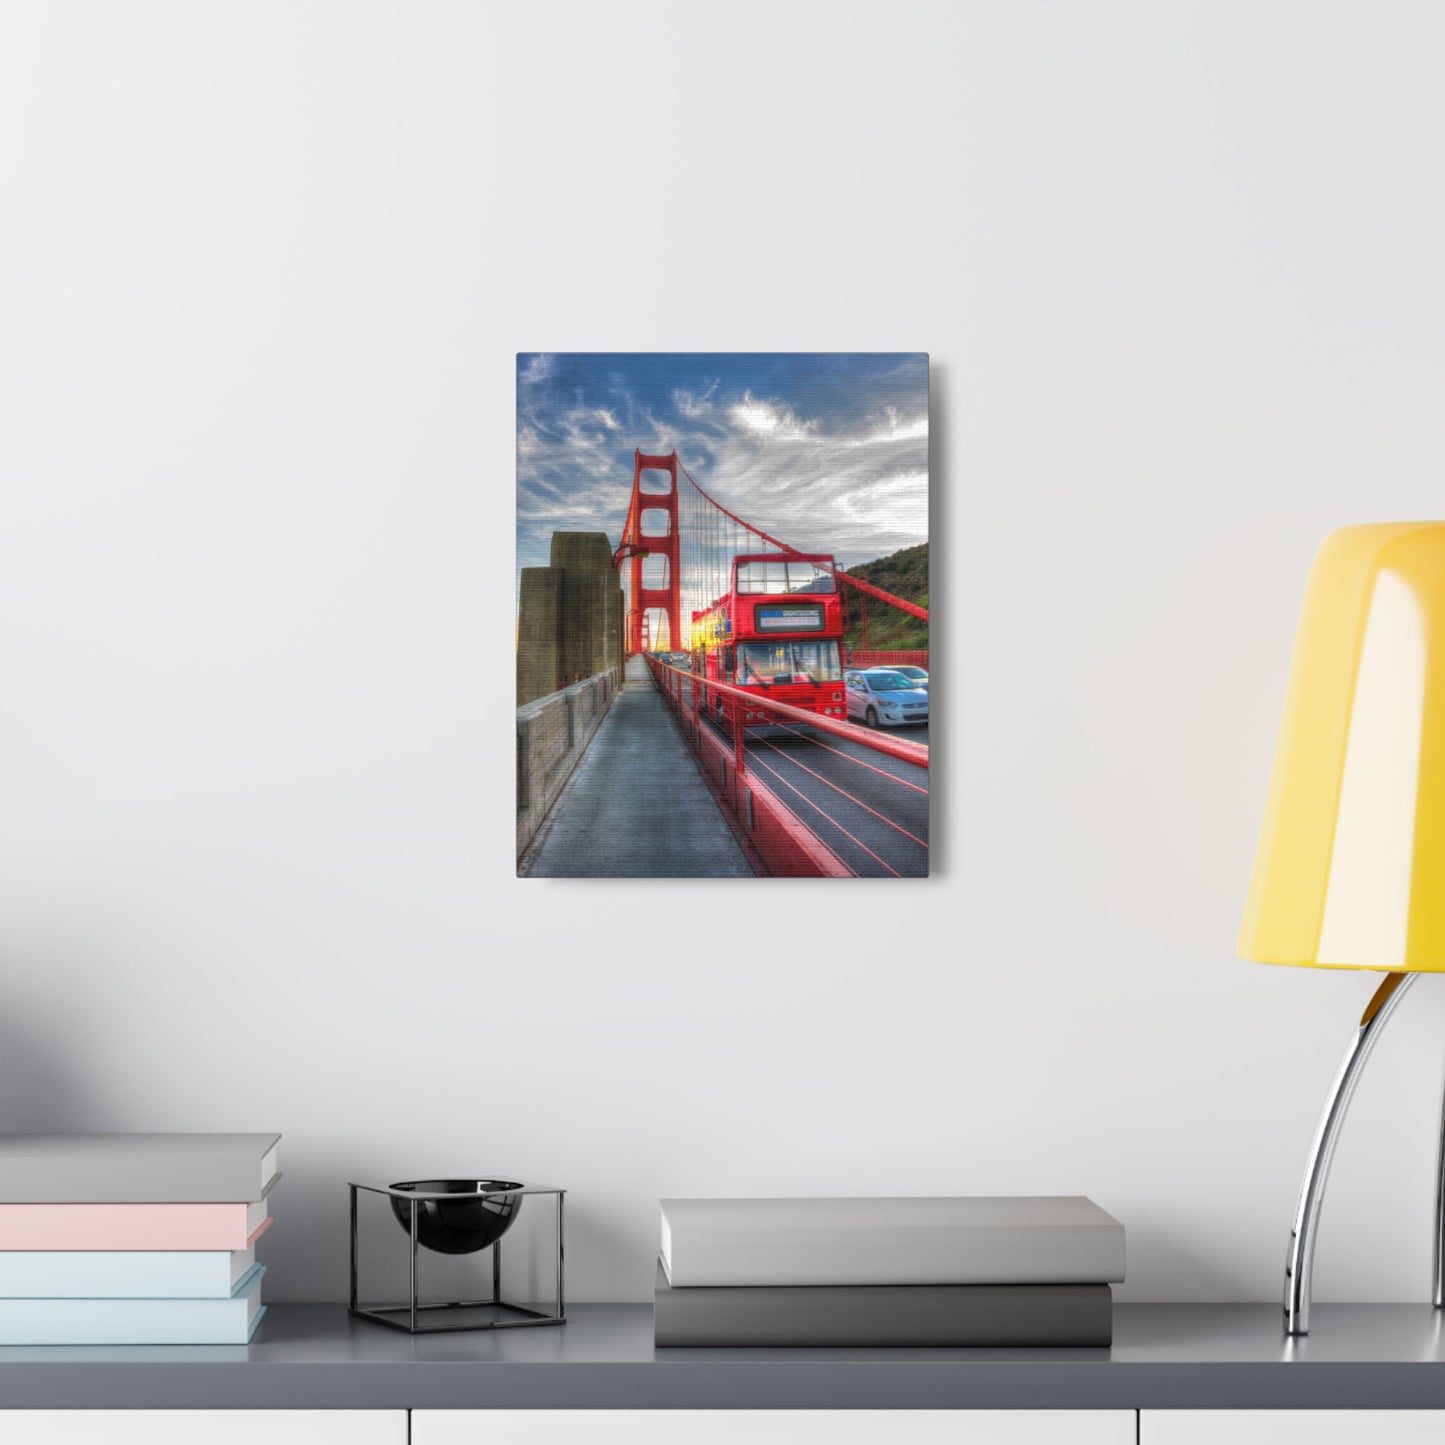 Canvas Print Of Double Decker Bus And Golden Gate Bridge In San Francisco For Wall Art